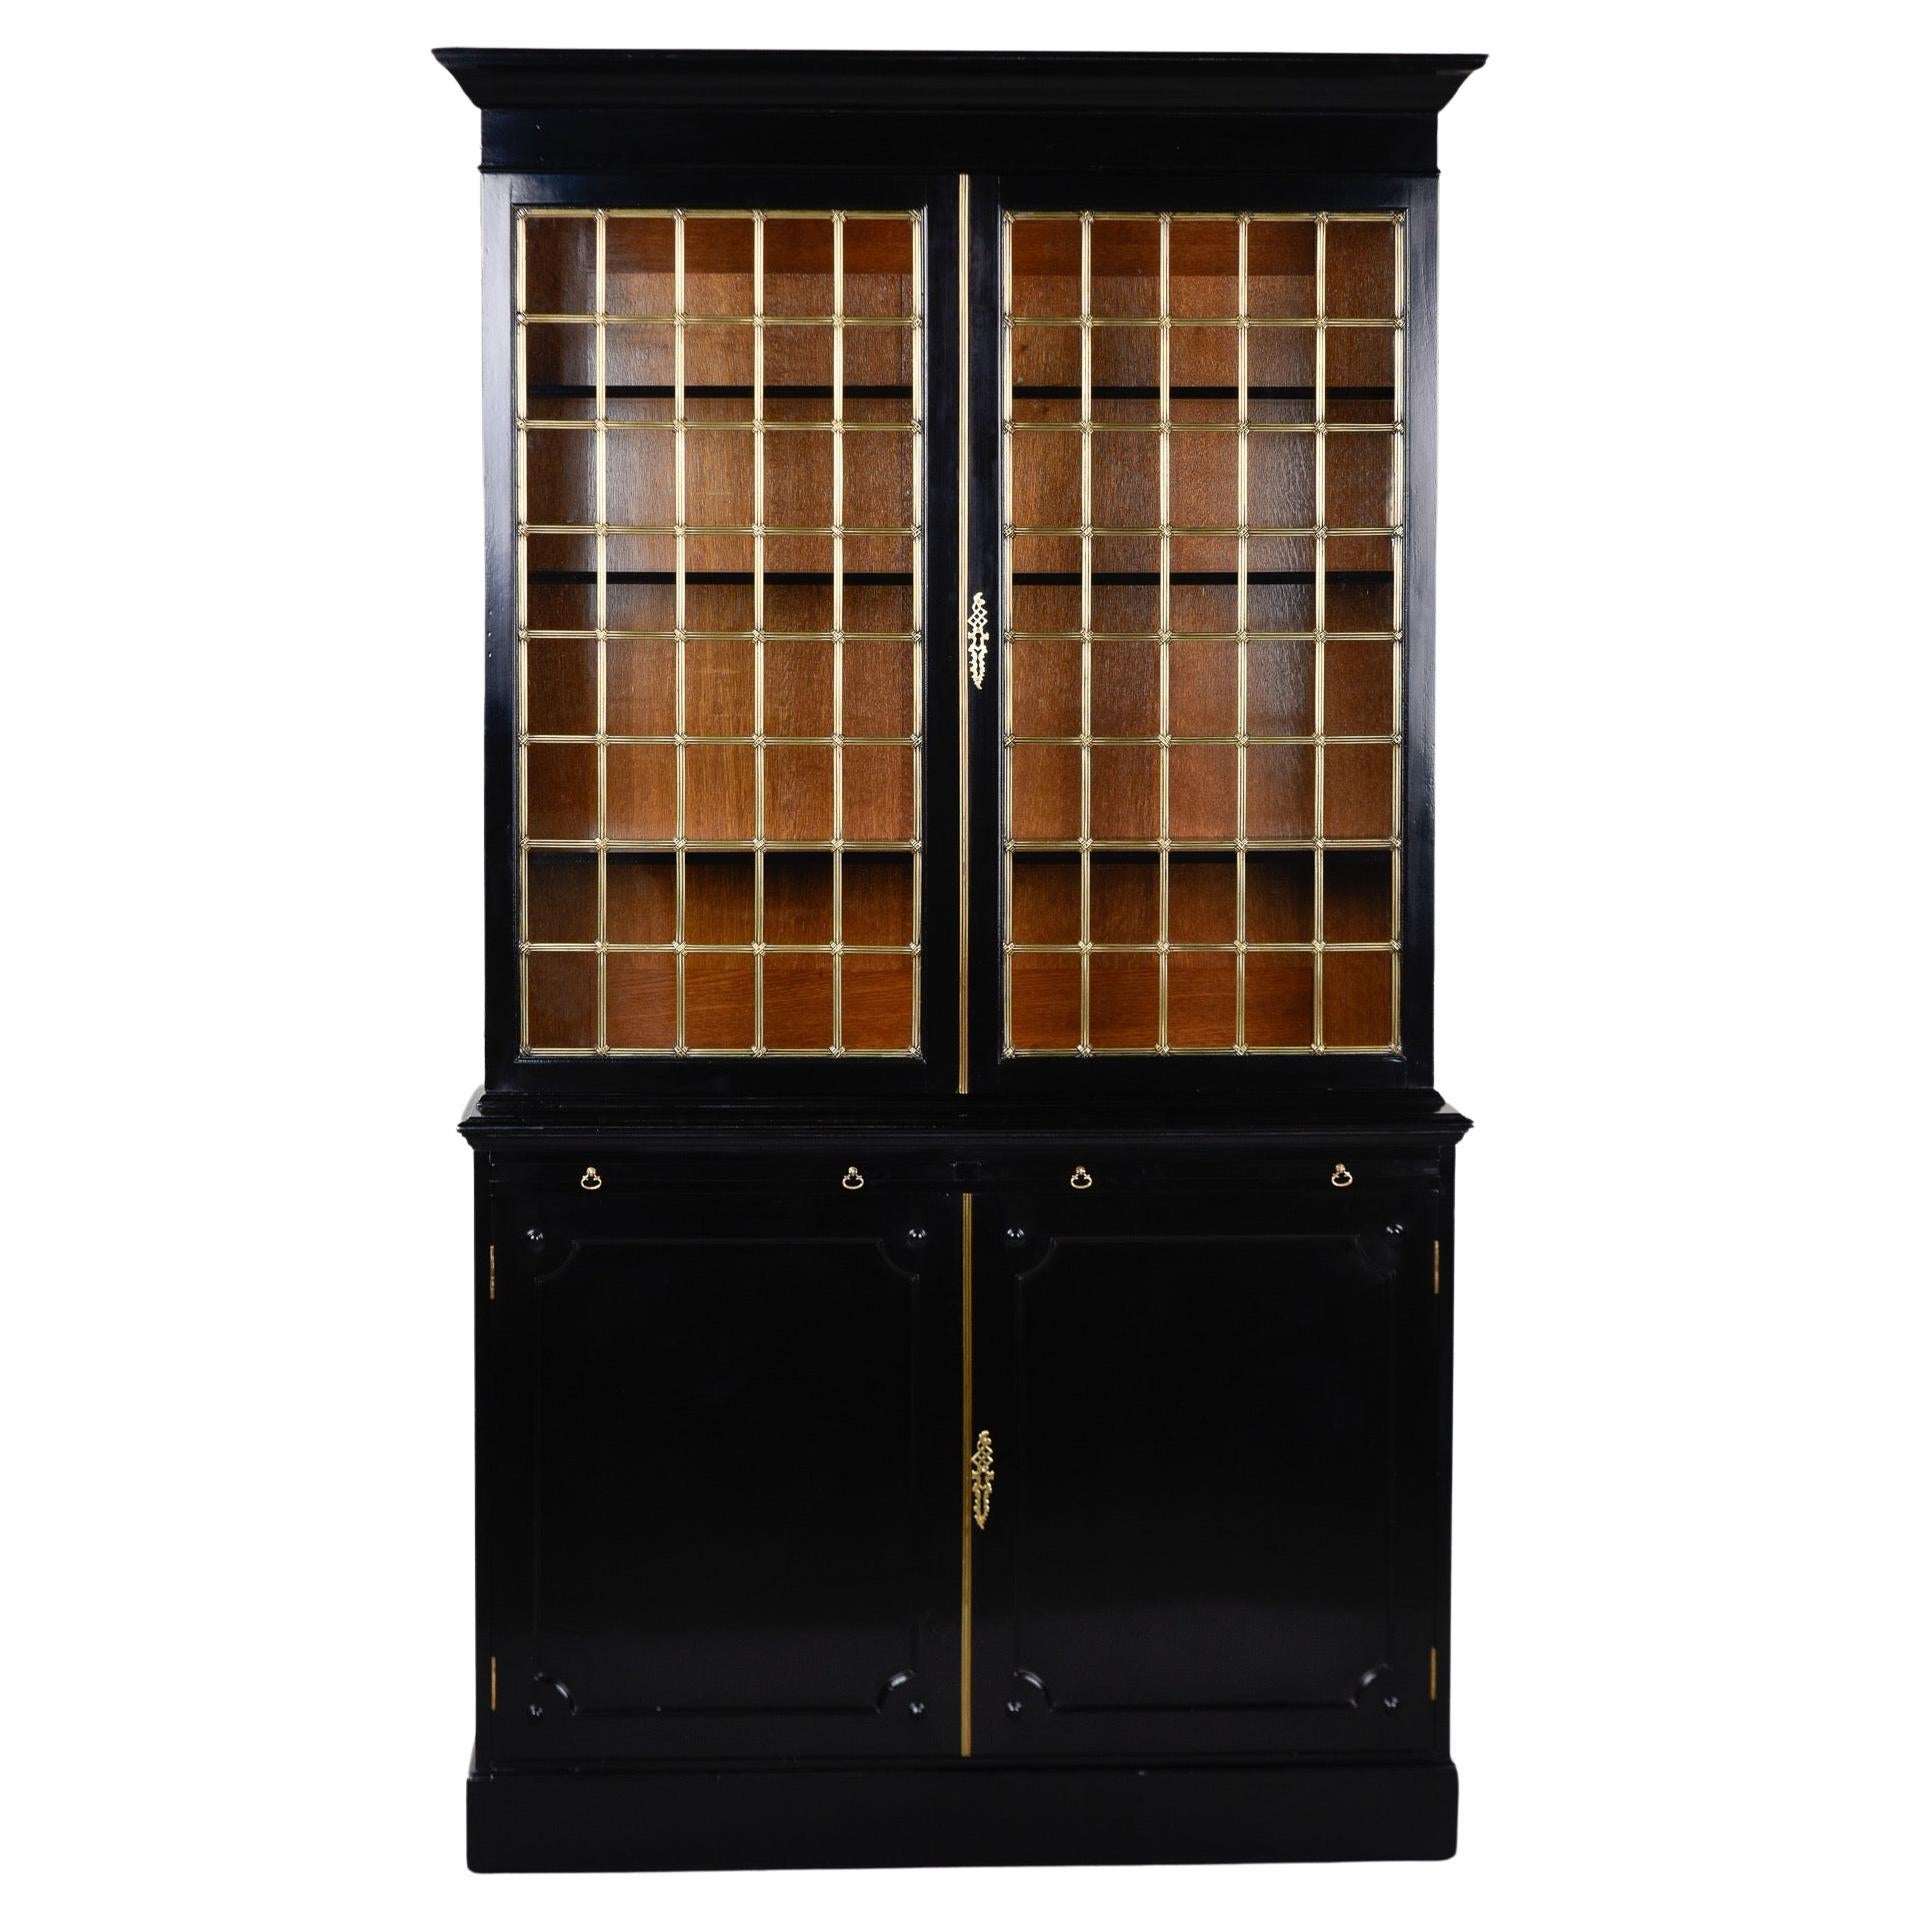 Early 20th C English Ebonised Mahogany Bookcase with Brass Grill & Leaded Glass For Sale